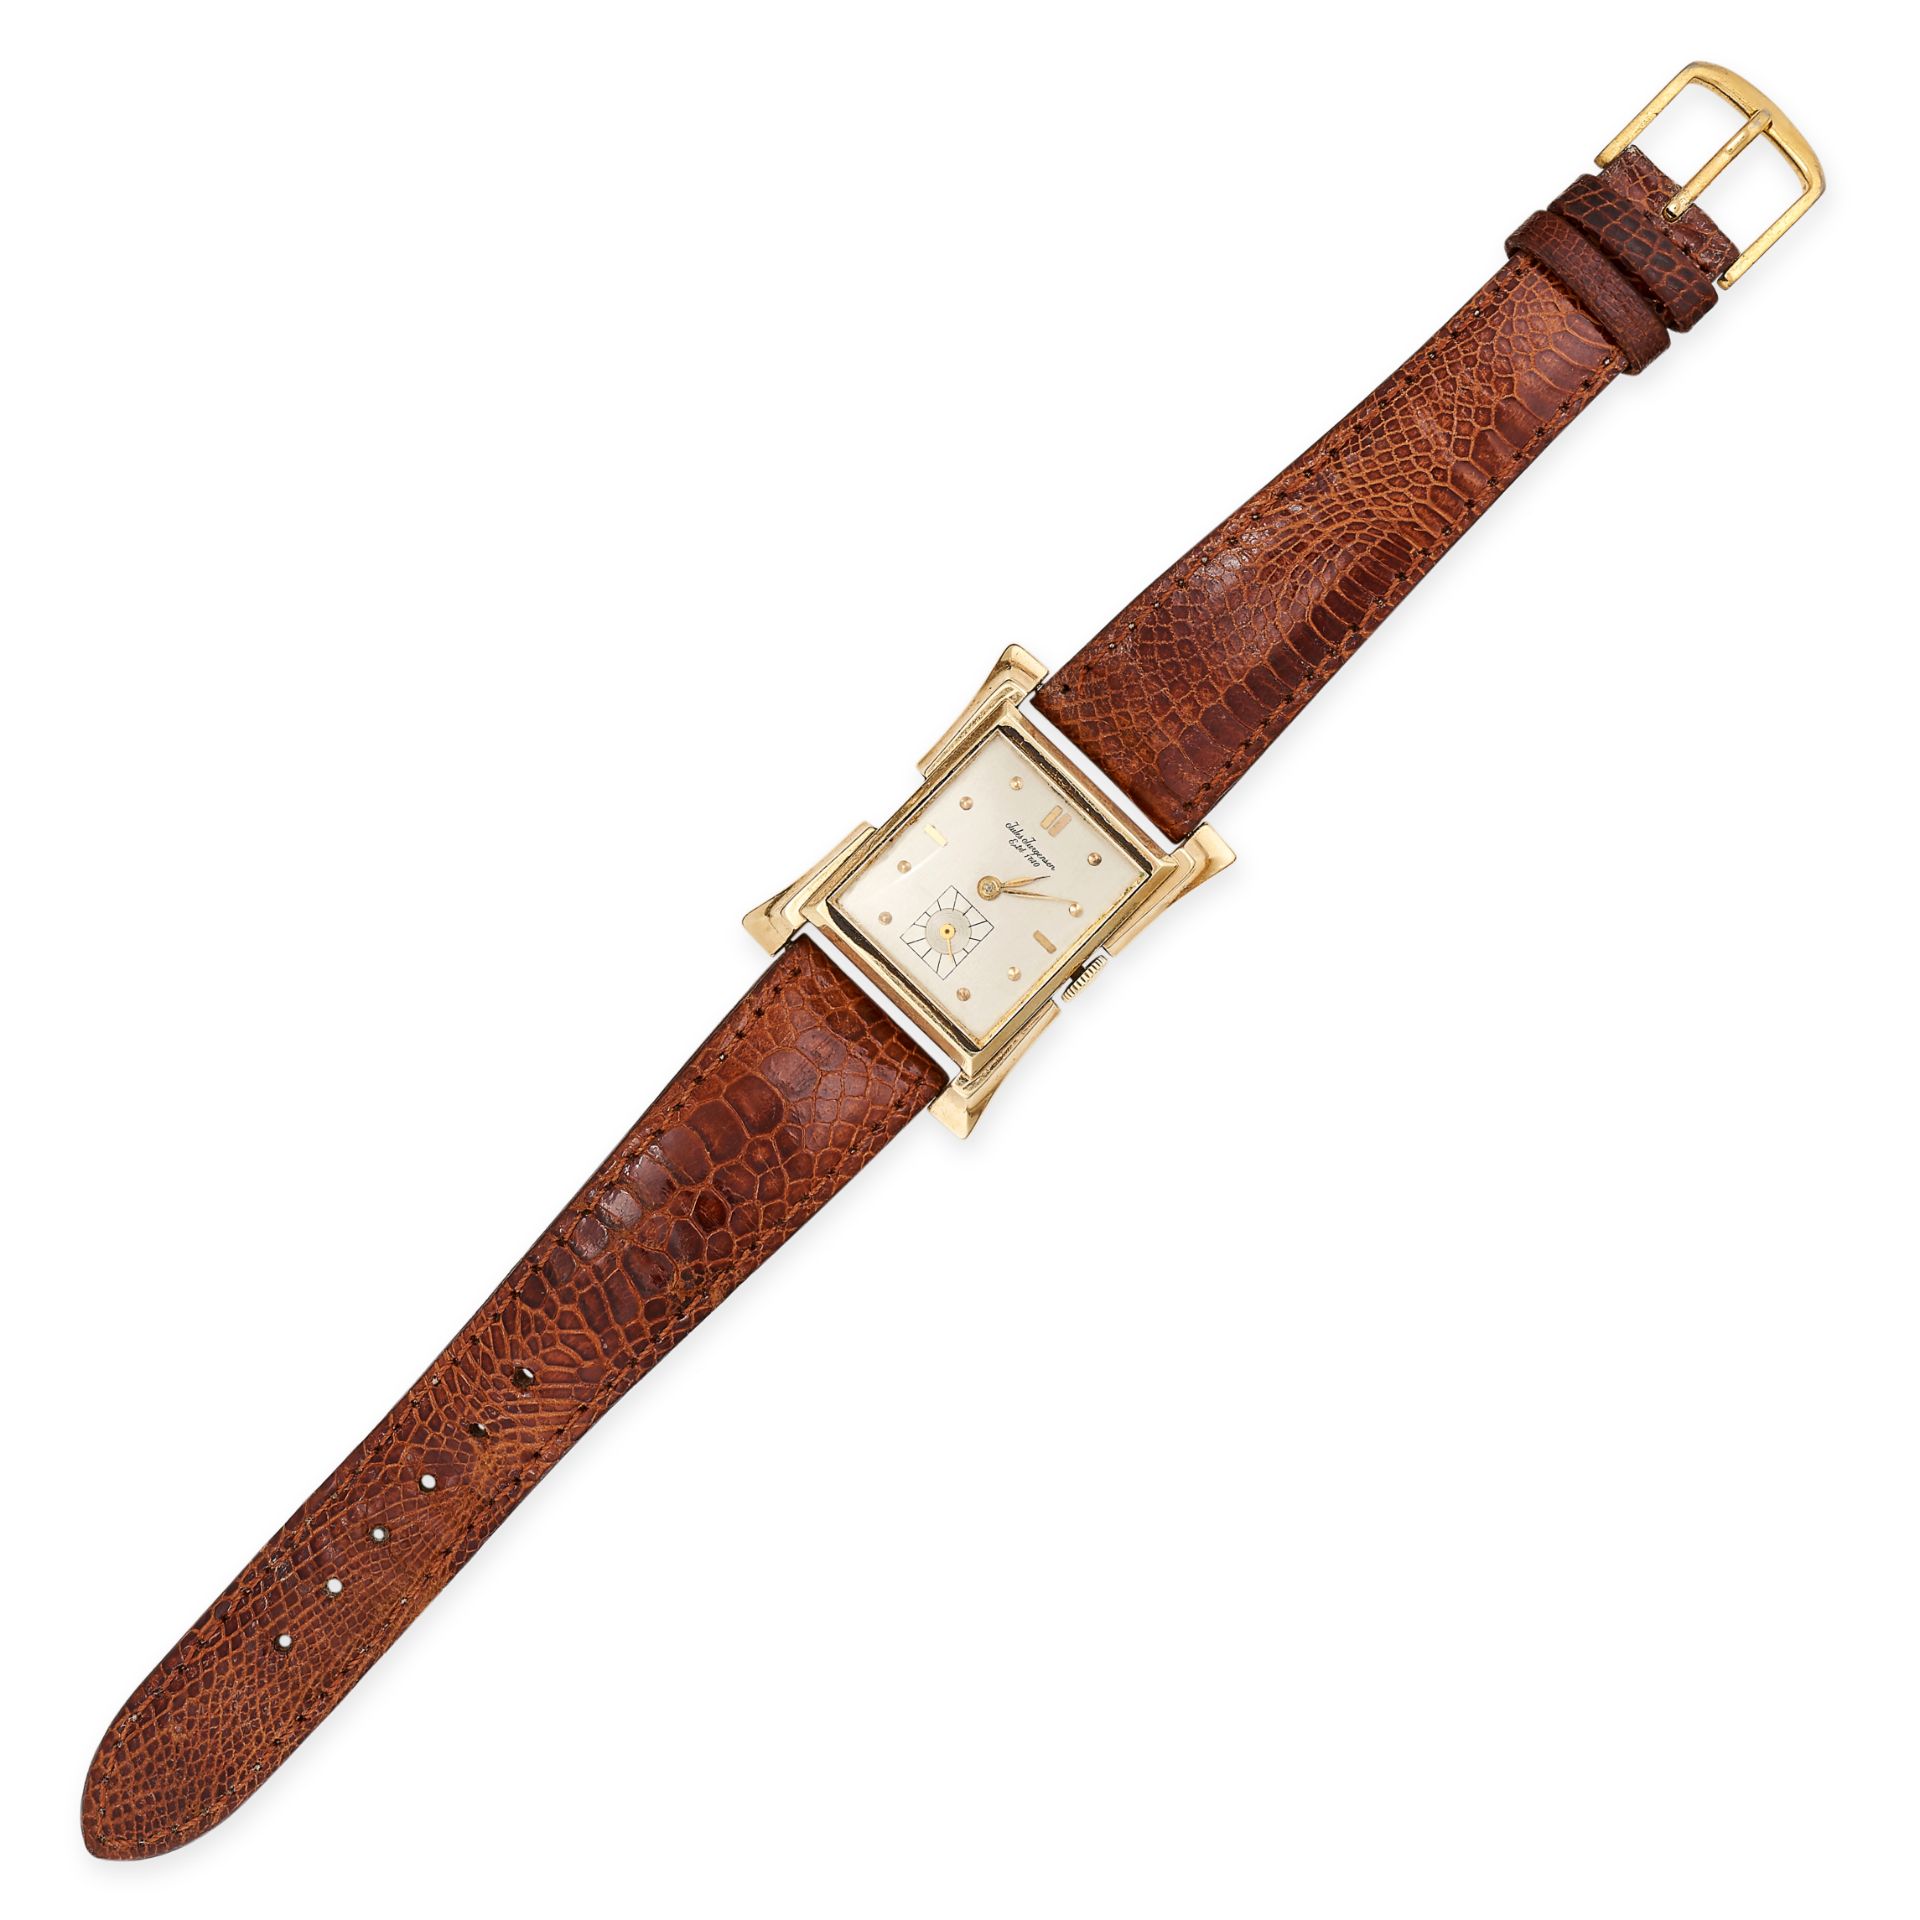 JULES JURGENSEN, A VINTAGE WRISTWATCH 1950S in 14ct yellow gold, white face with seconds sub-dial to